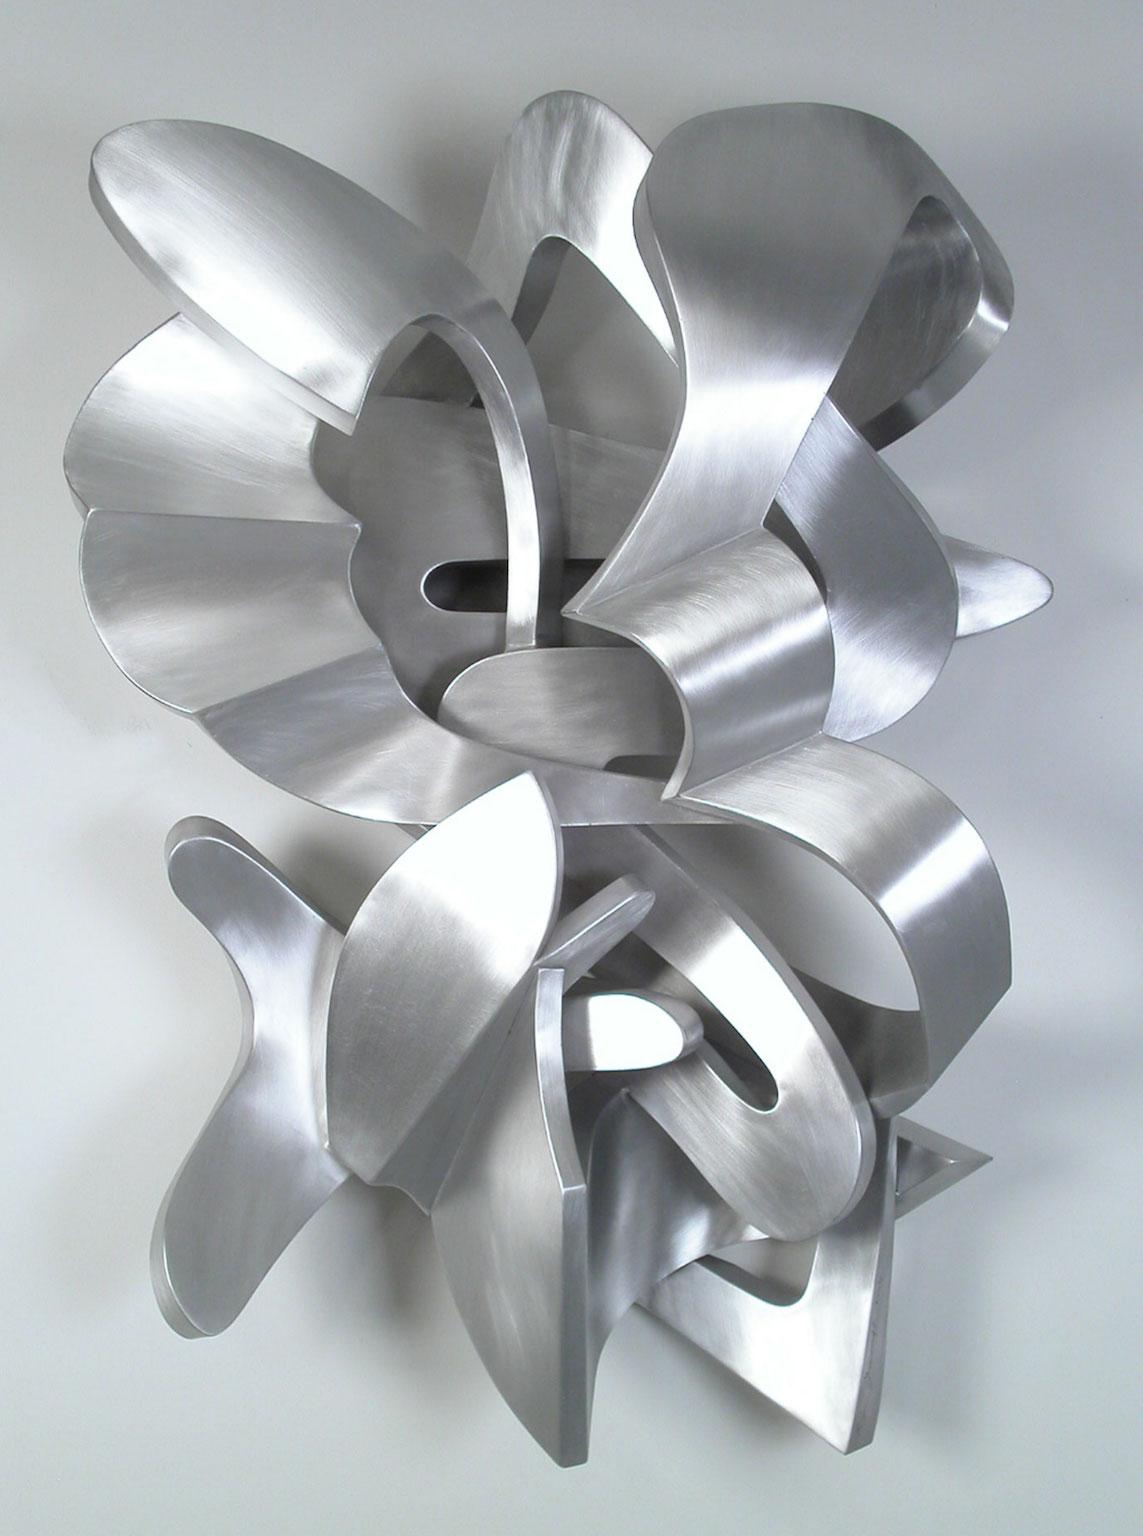 Kevin Barrett Abstract Sculpture - "Fernande", Contemporary Abstract Metal Wall Relief Sculpture in Silver